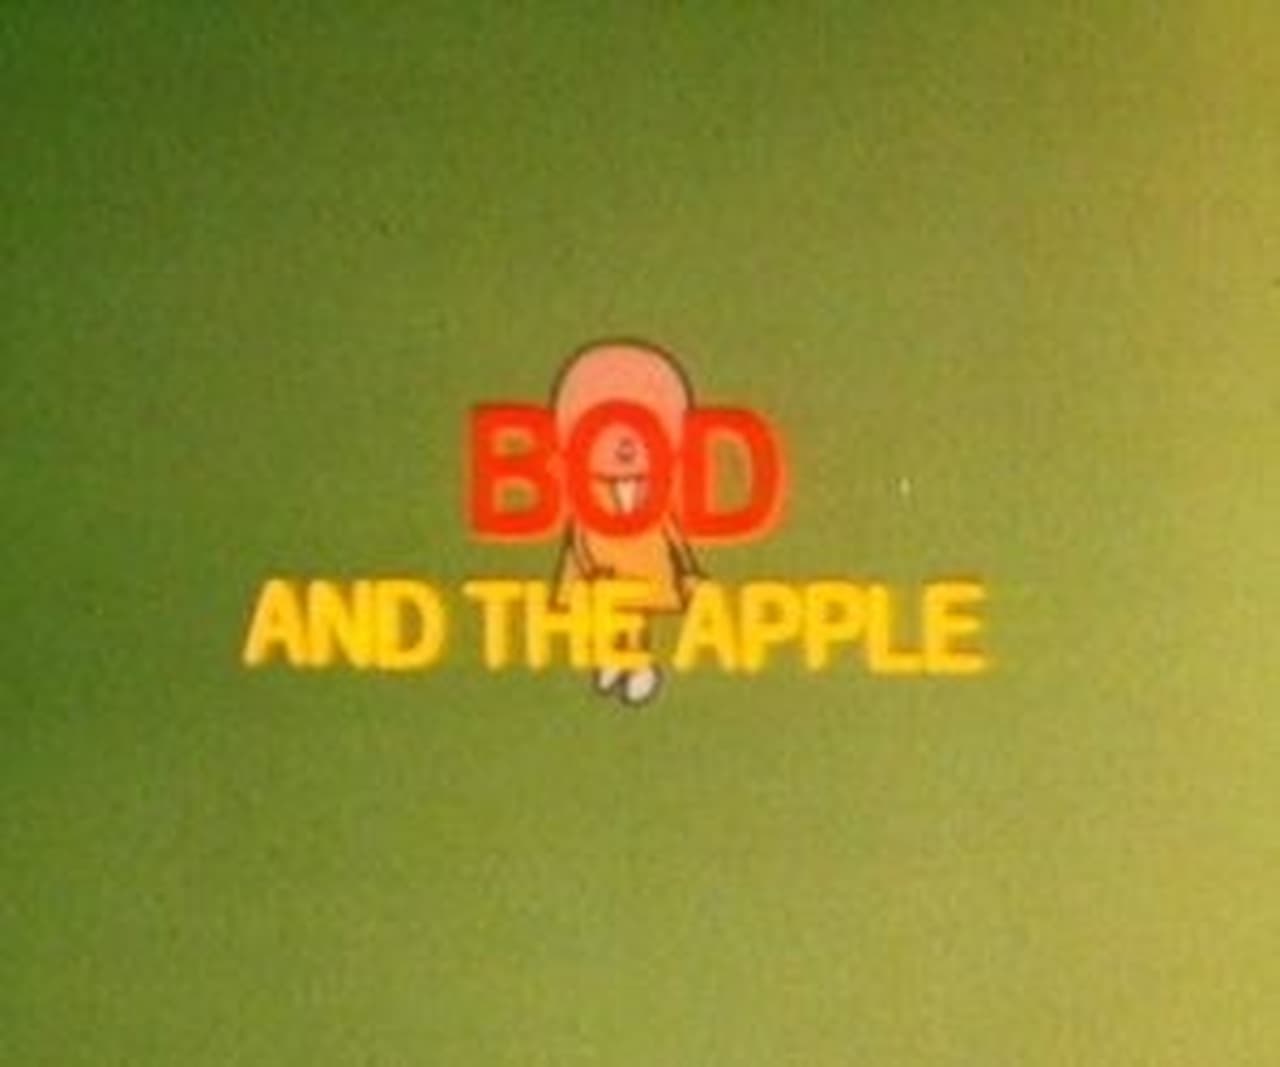 Bod and the Apple